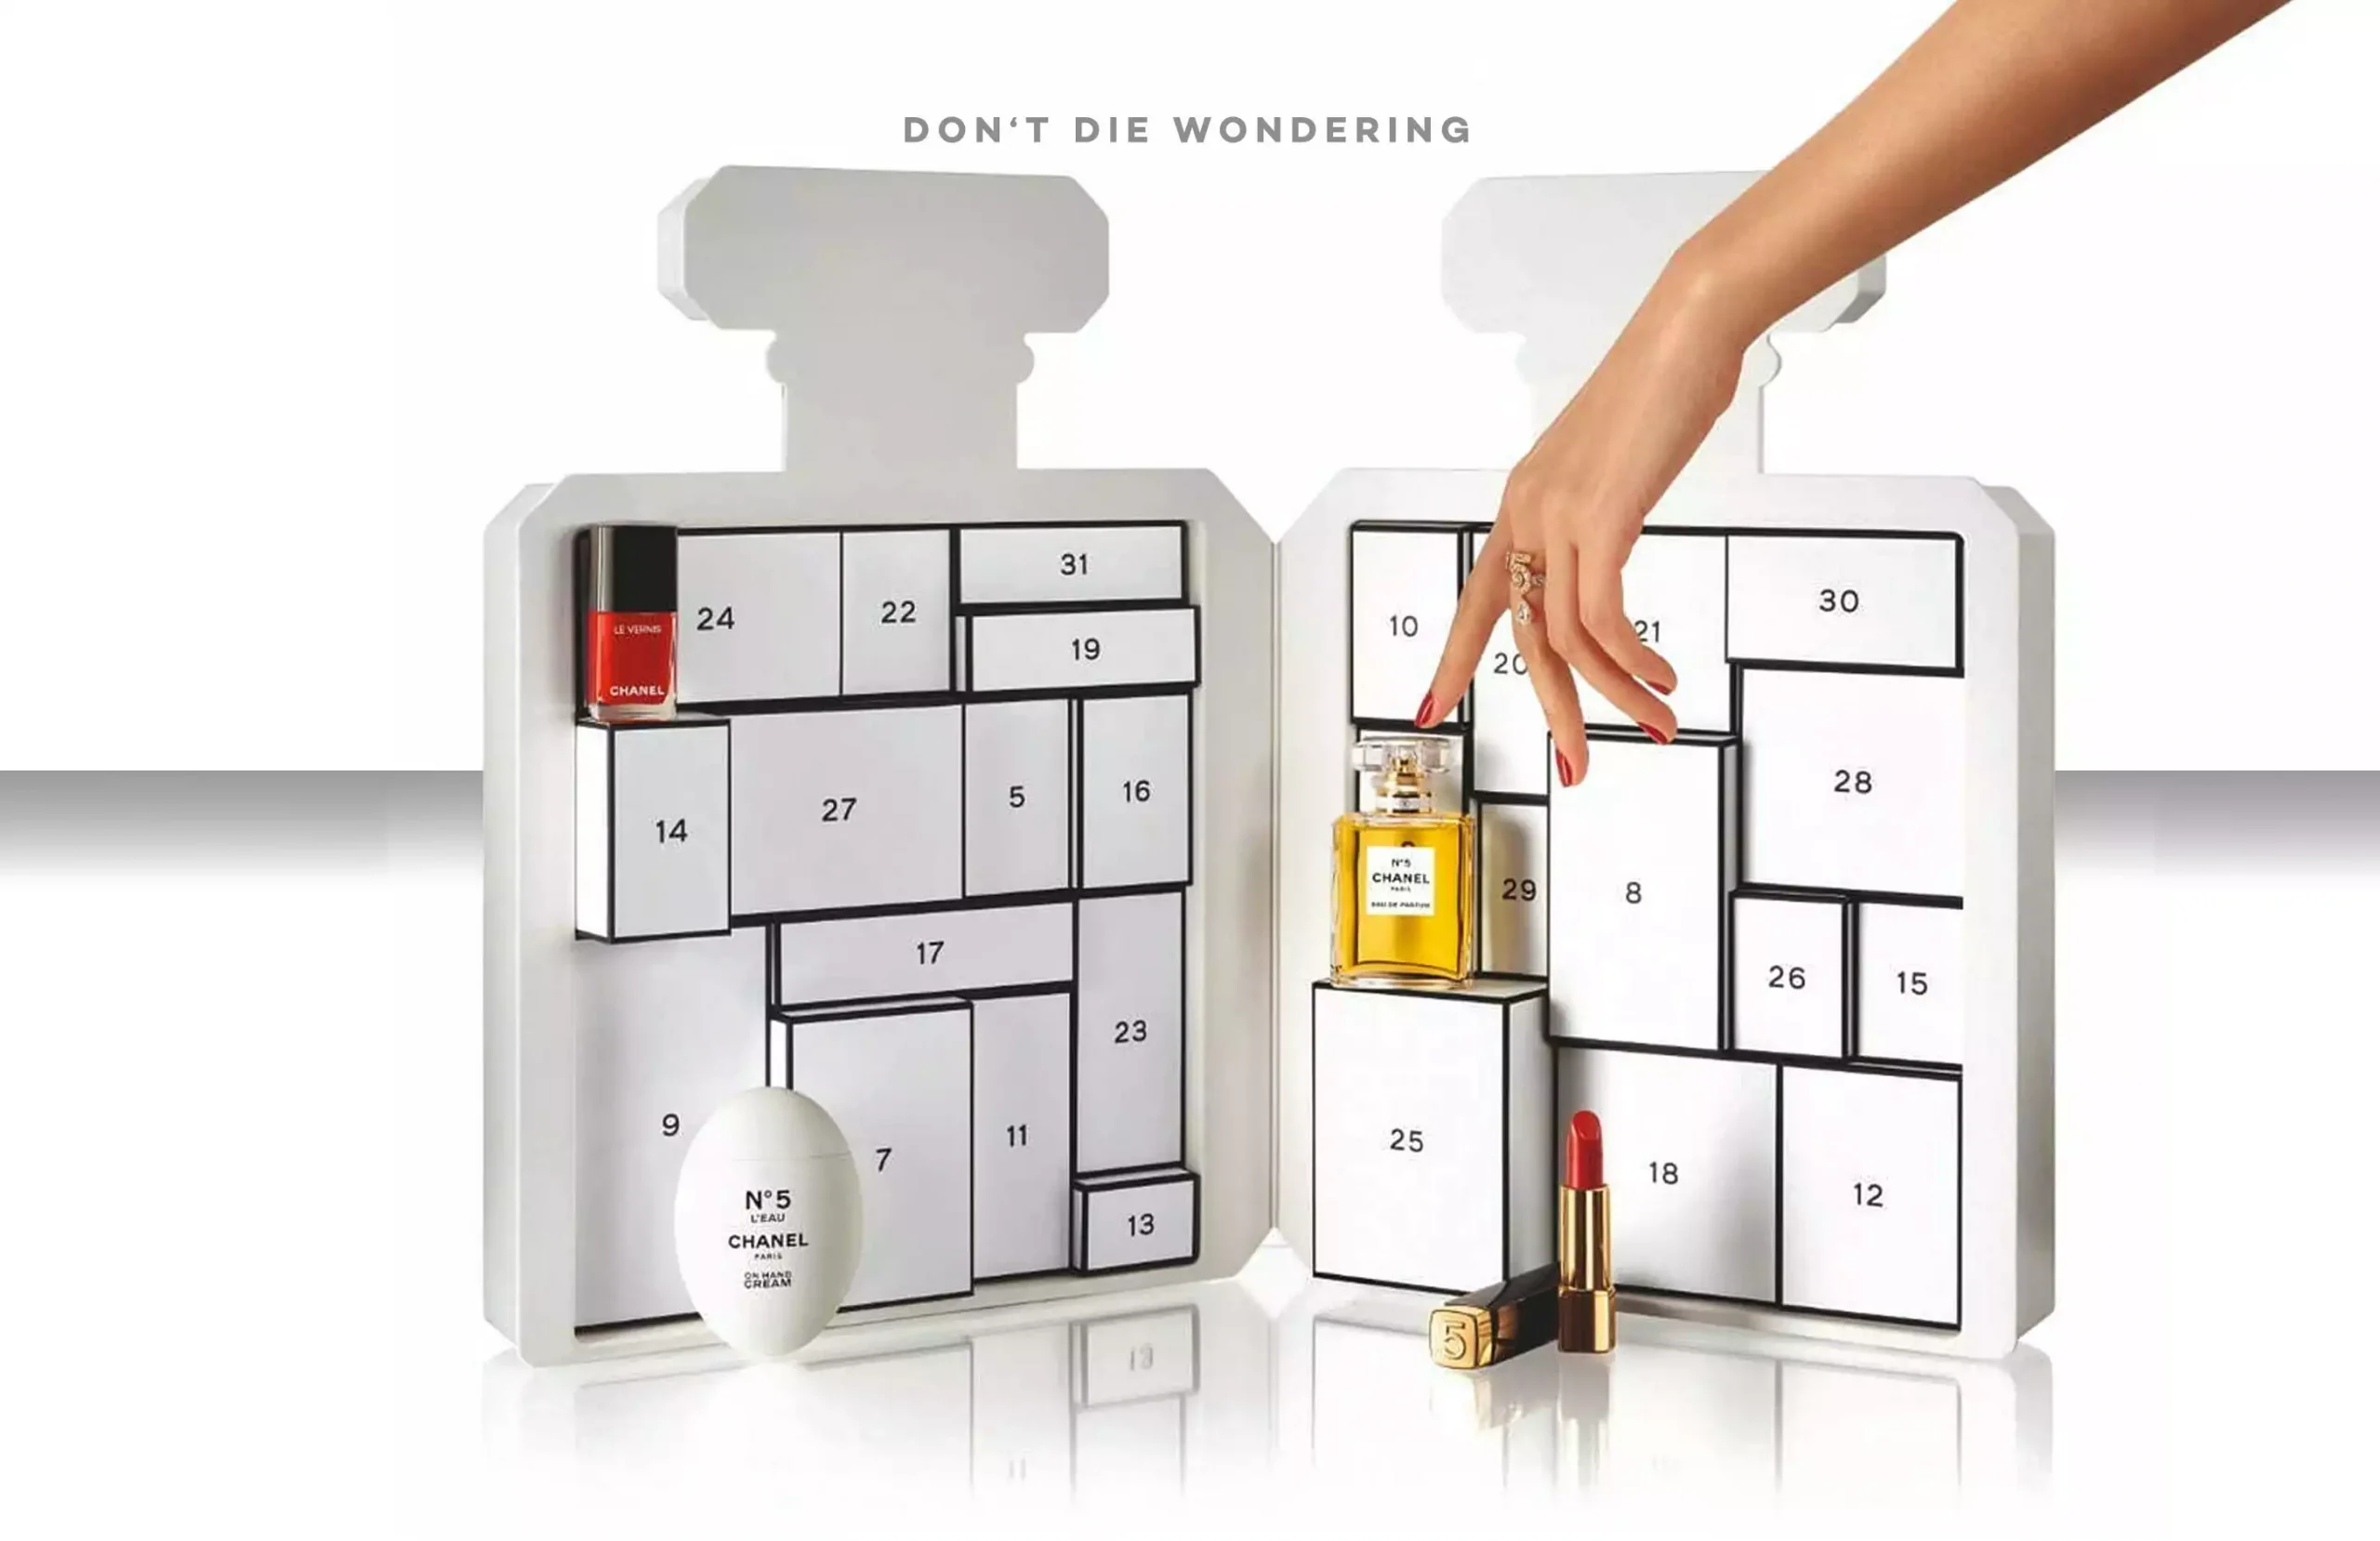 Beauty advent calendars are a big, wasteful business